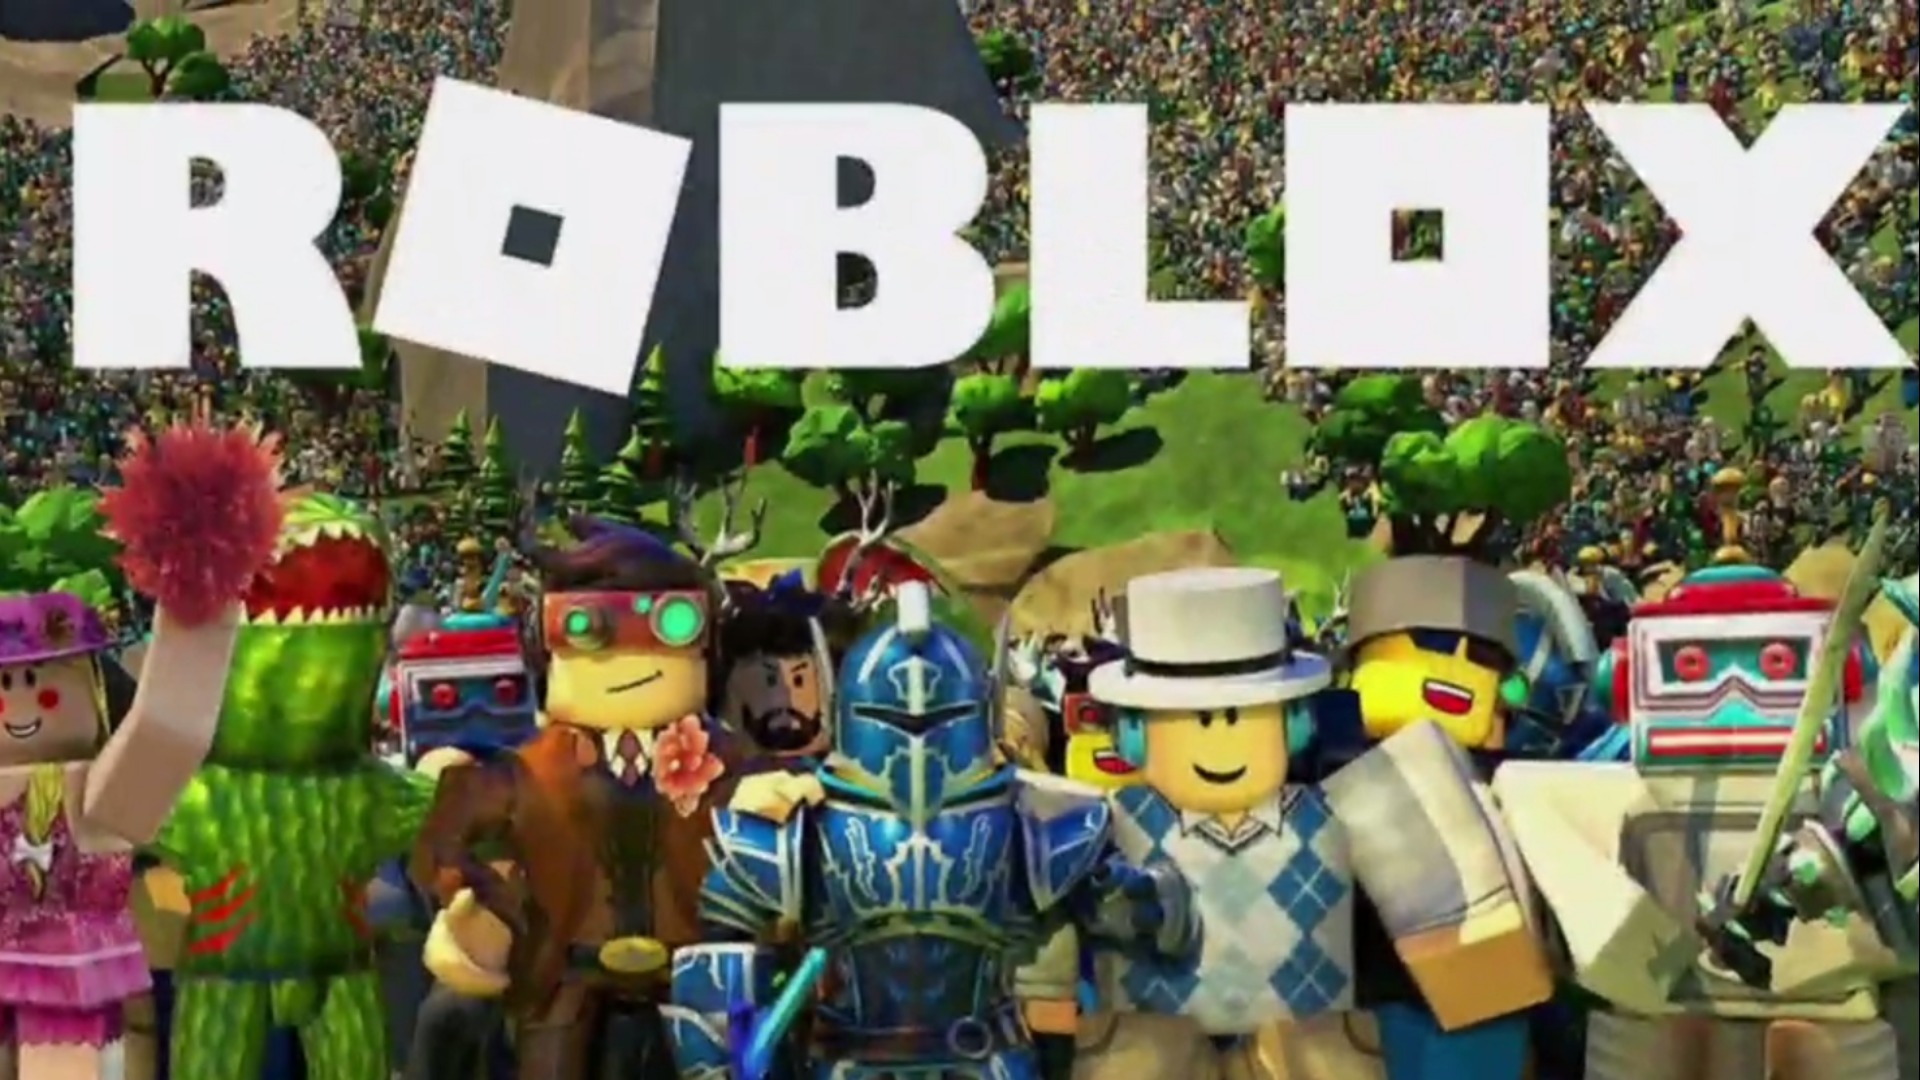 New Questions About Some Inappropriate Content On The Gaming Platform Roblox - robloxgame background transparent the rise of roblox